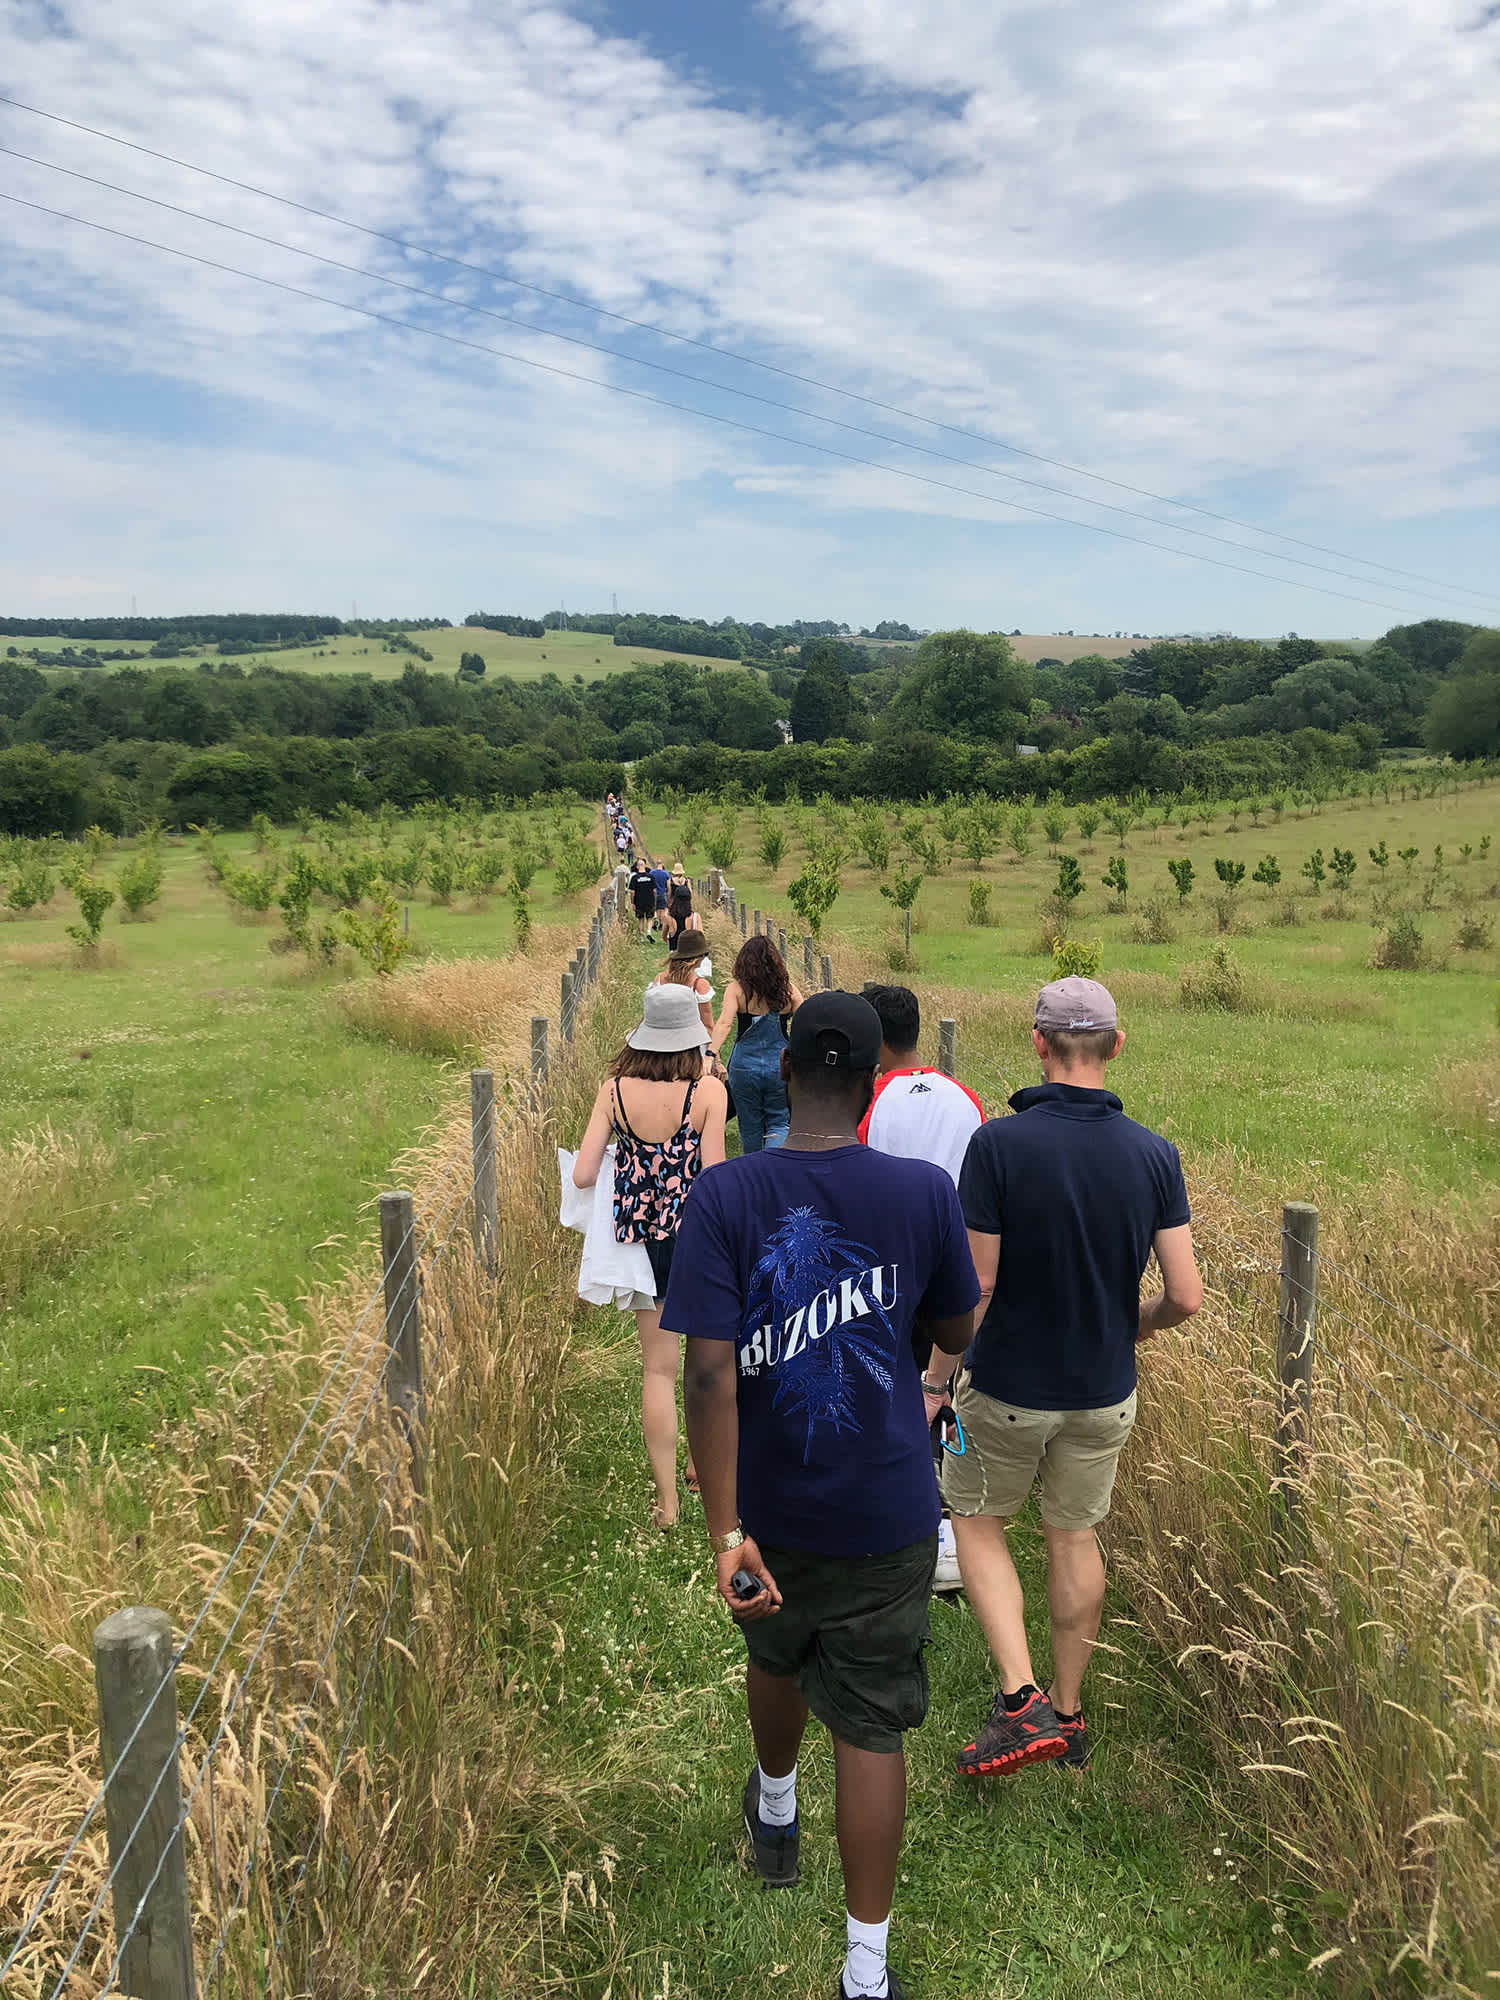 A day out at ustwo, walking in the countryside